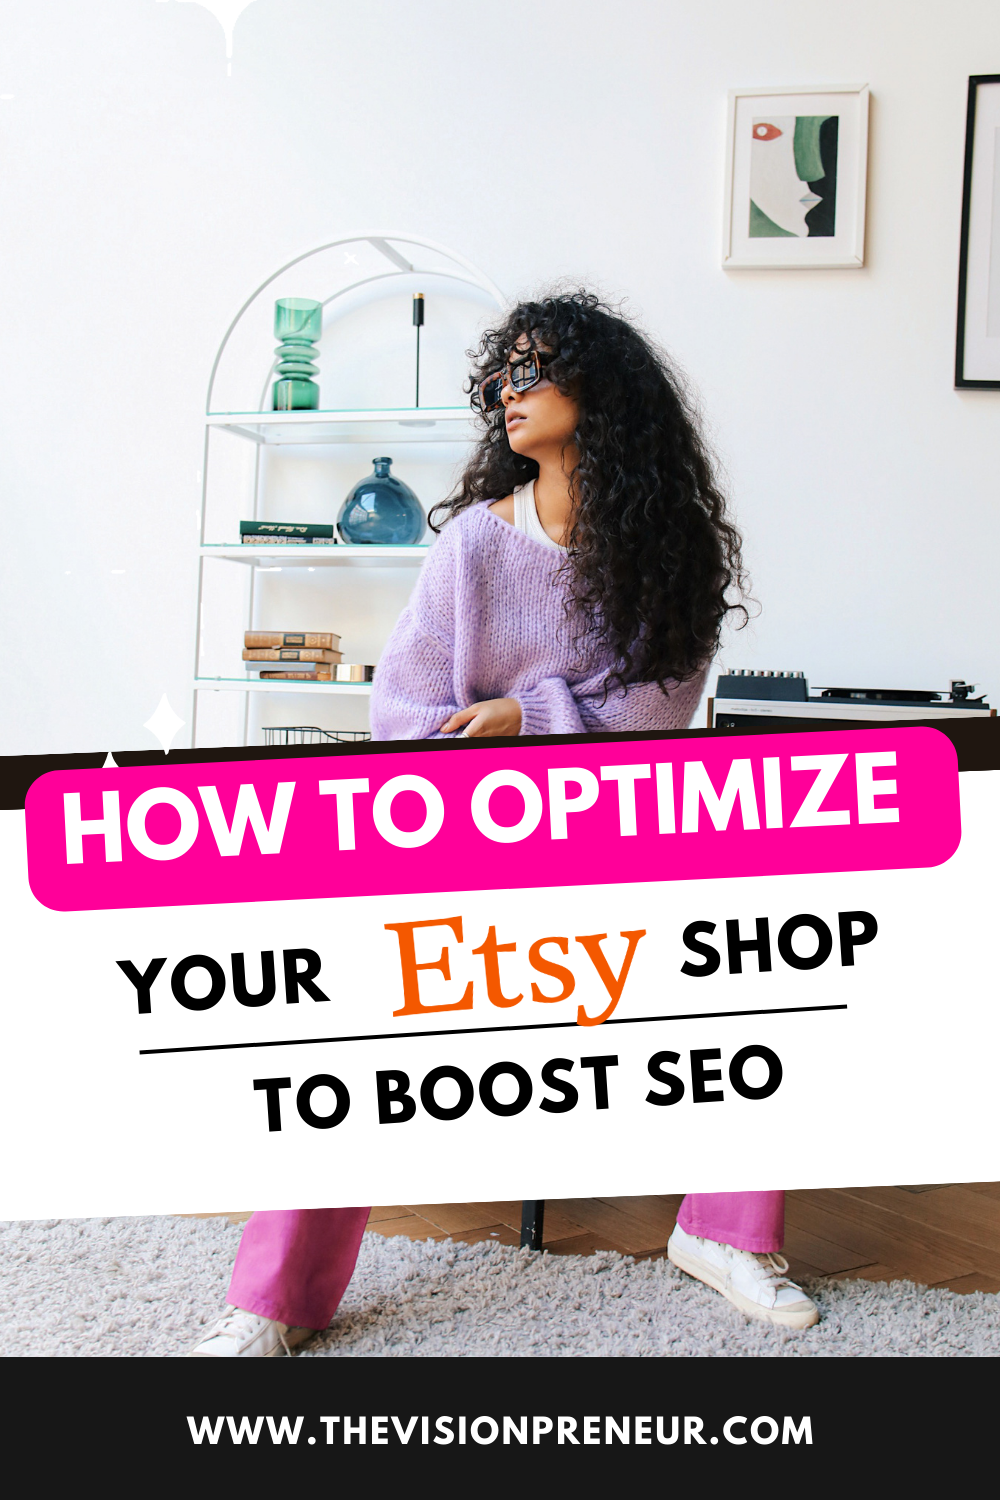 Optimizing Your Etsy Shop Branding and Visual Identity: A Comprehensive Guide to Improving SEO and Customer Appeal